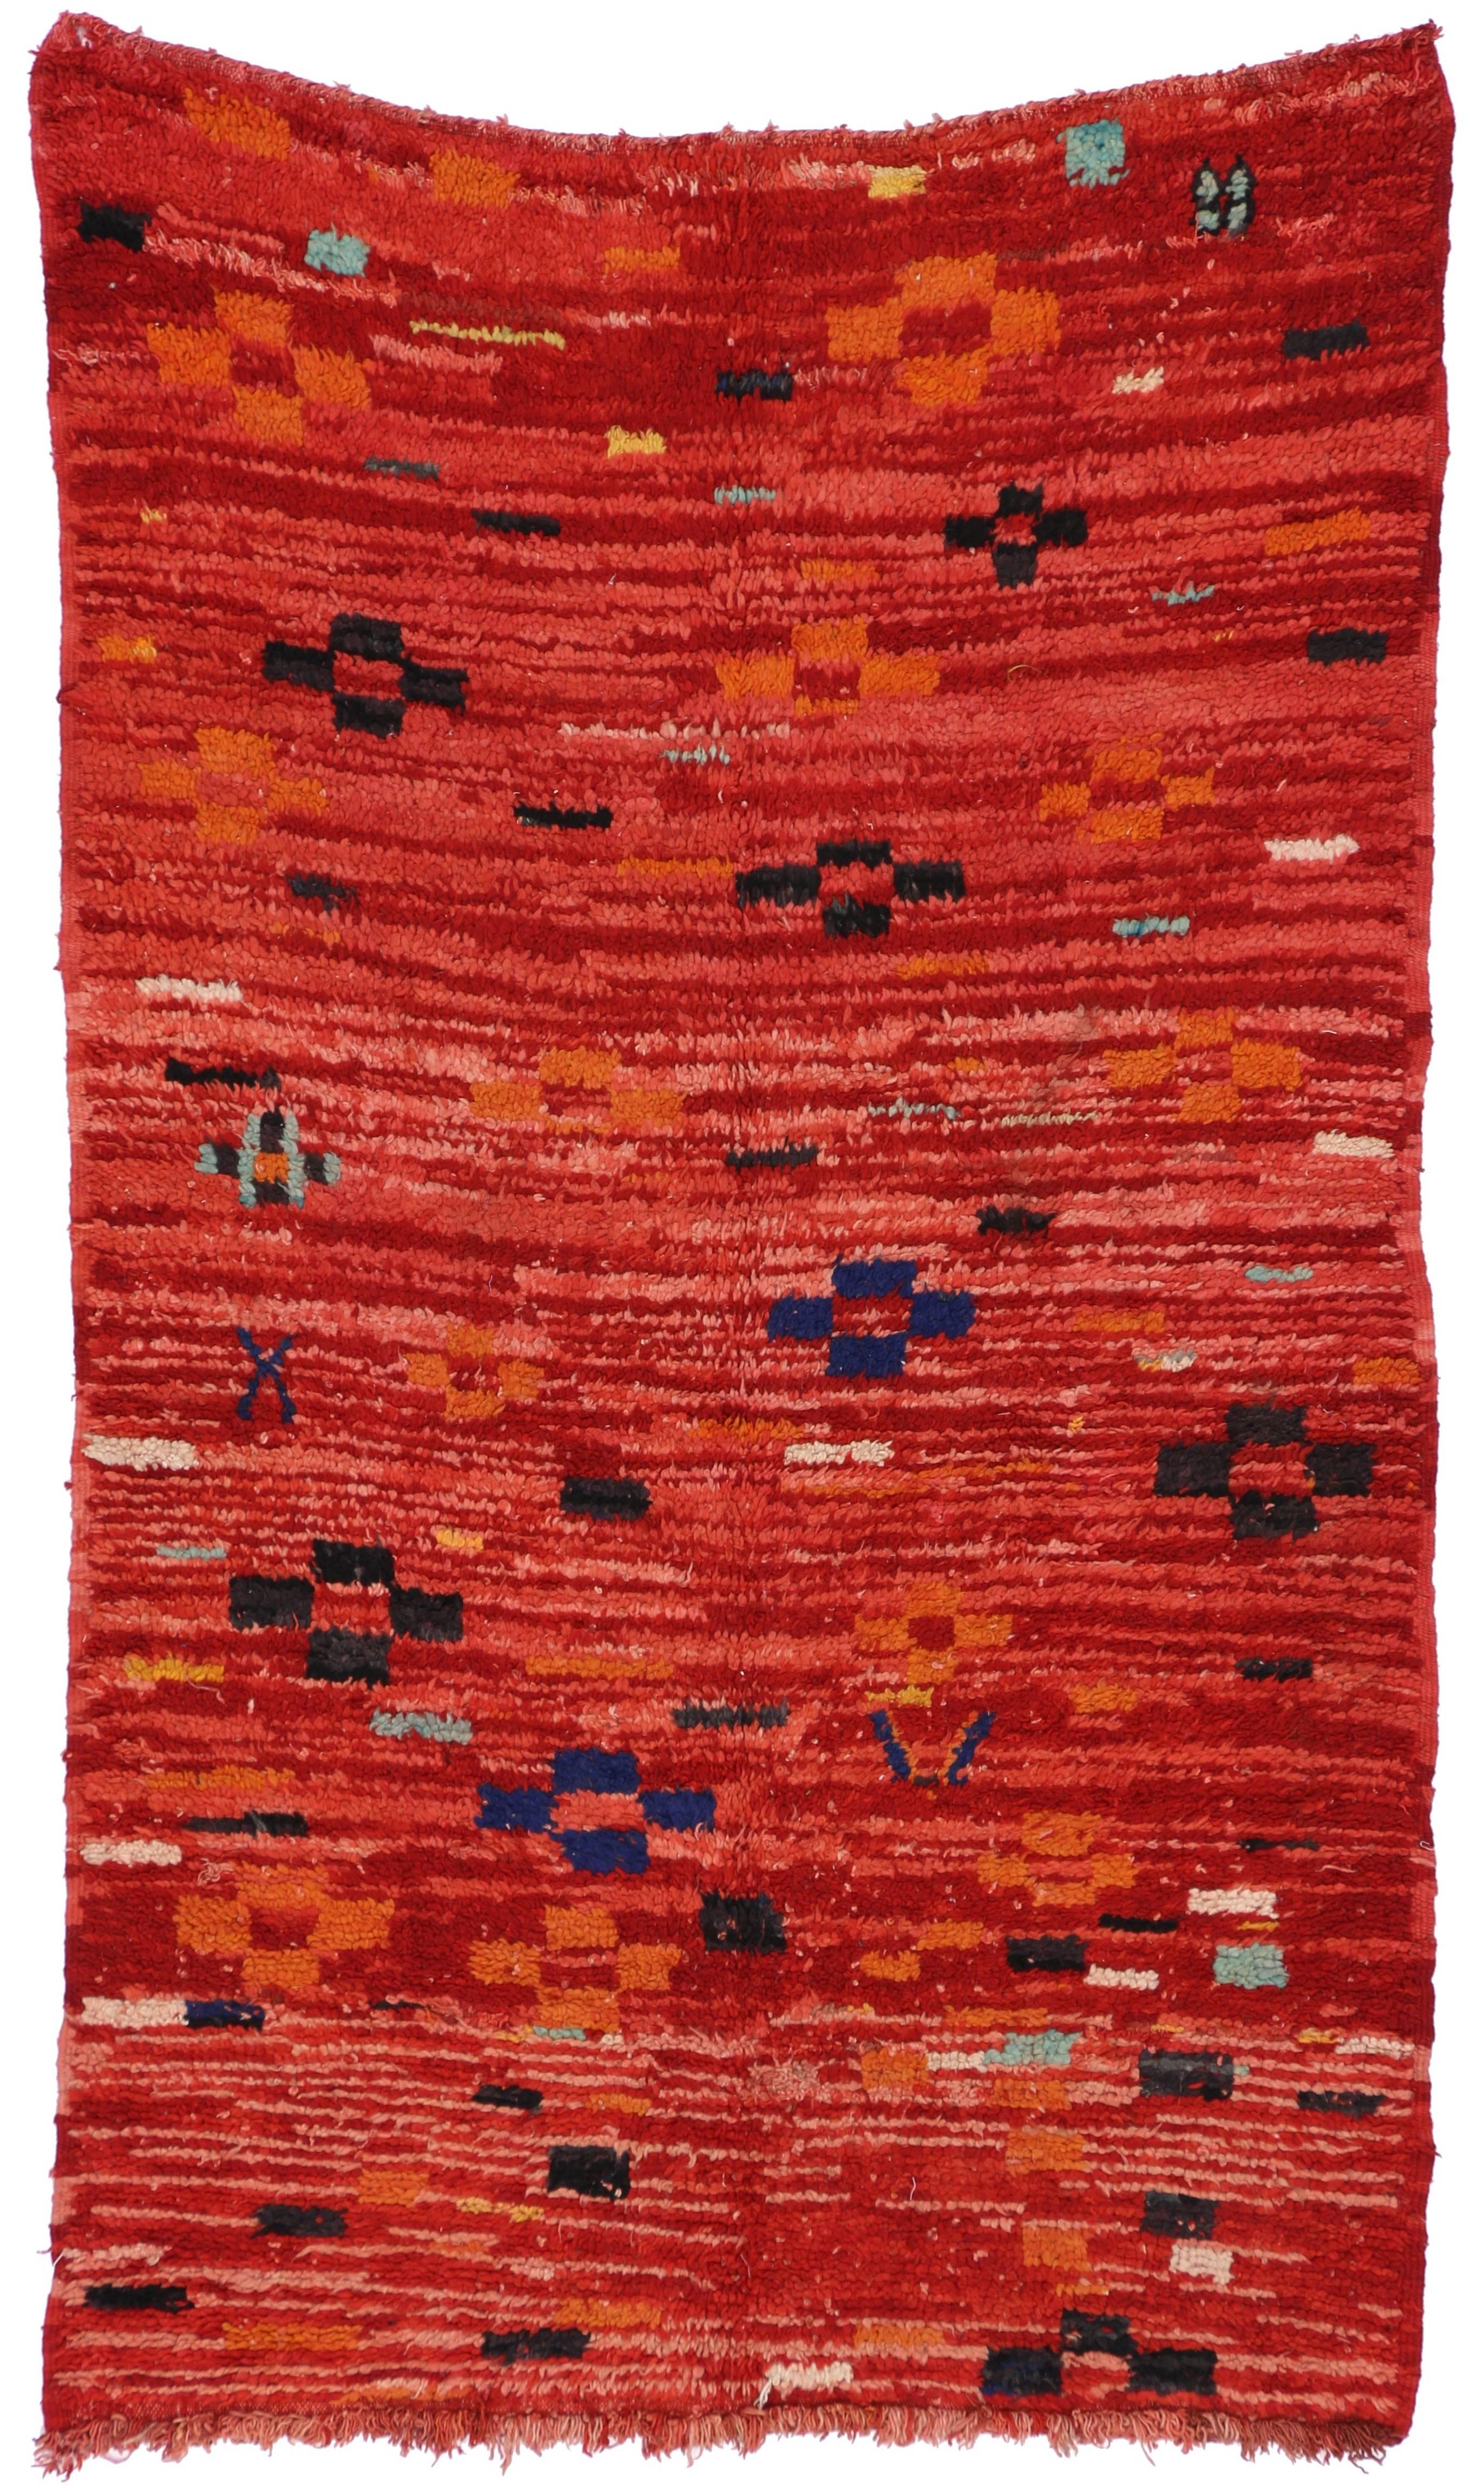 Color, style and plush pile, this Moroccan rug has it all. Putting this gorgeous red carpet in a neutral space is a little like lighting a fire — it adds instant warmth and pairs well with modern decor. The hints of dyes that make their way into the